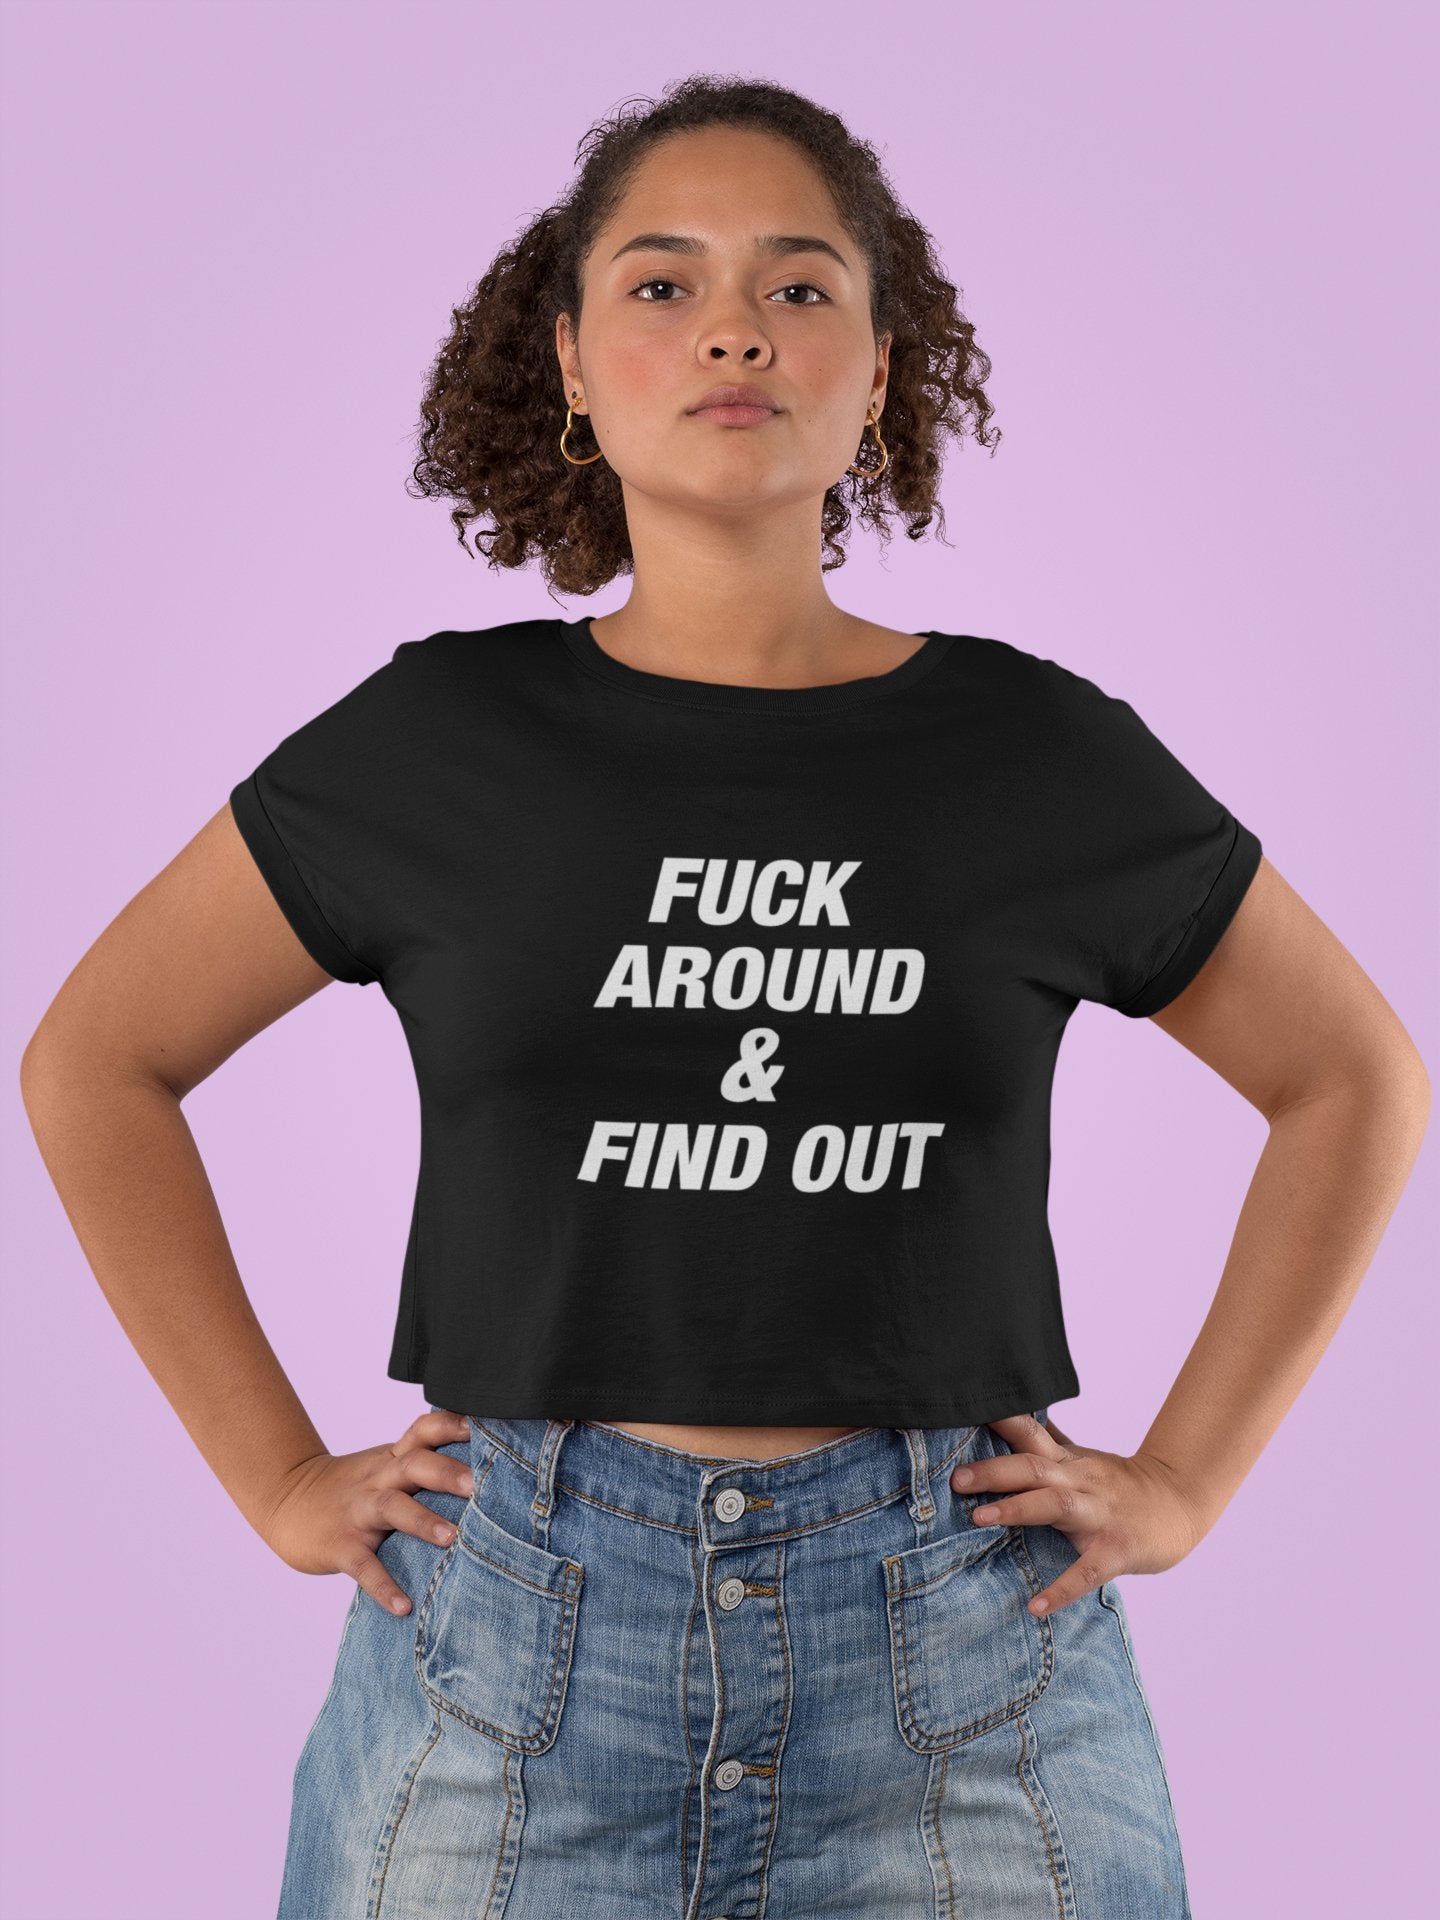 Farris Wheel "Fuck Around and Find Out" Crop Top - BeExtra! Apparel & More